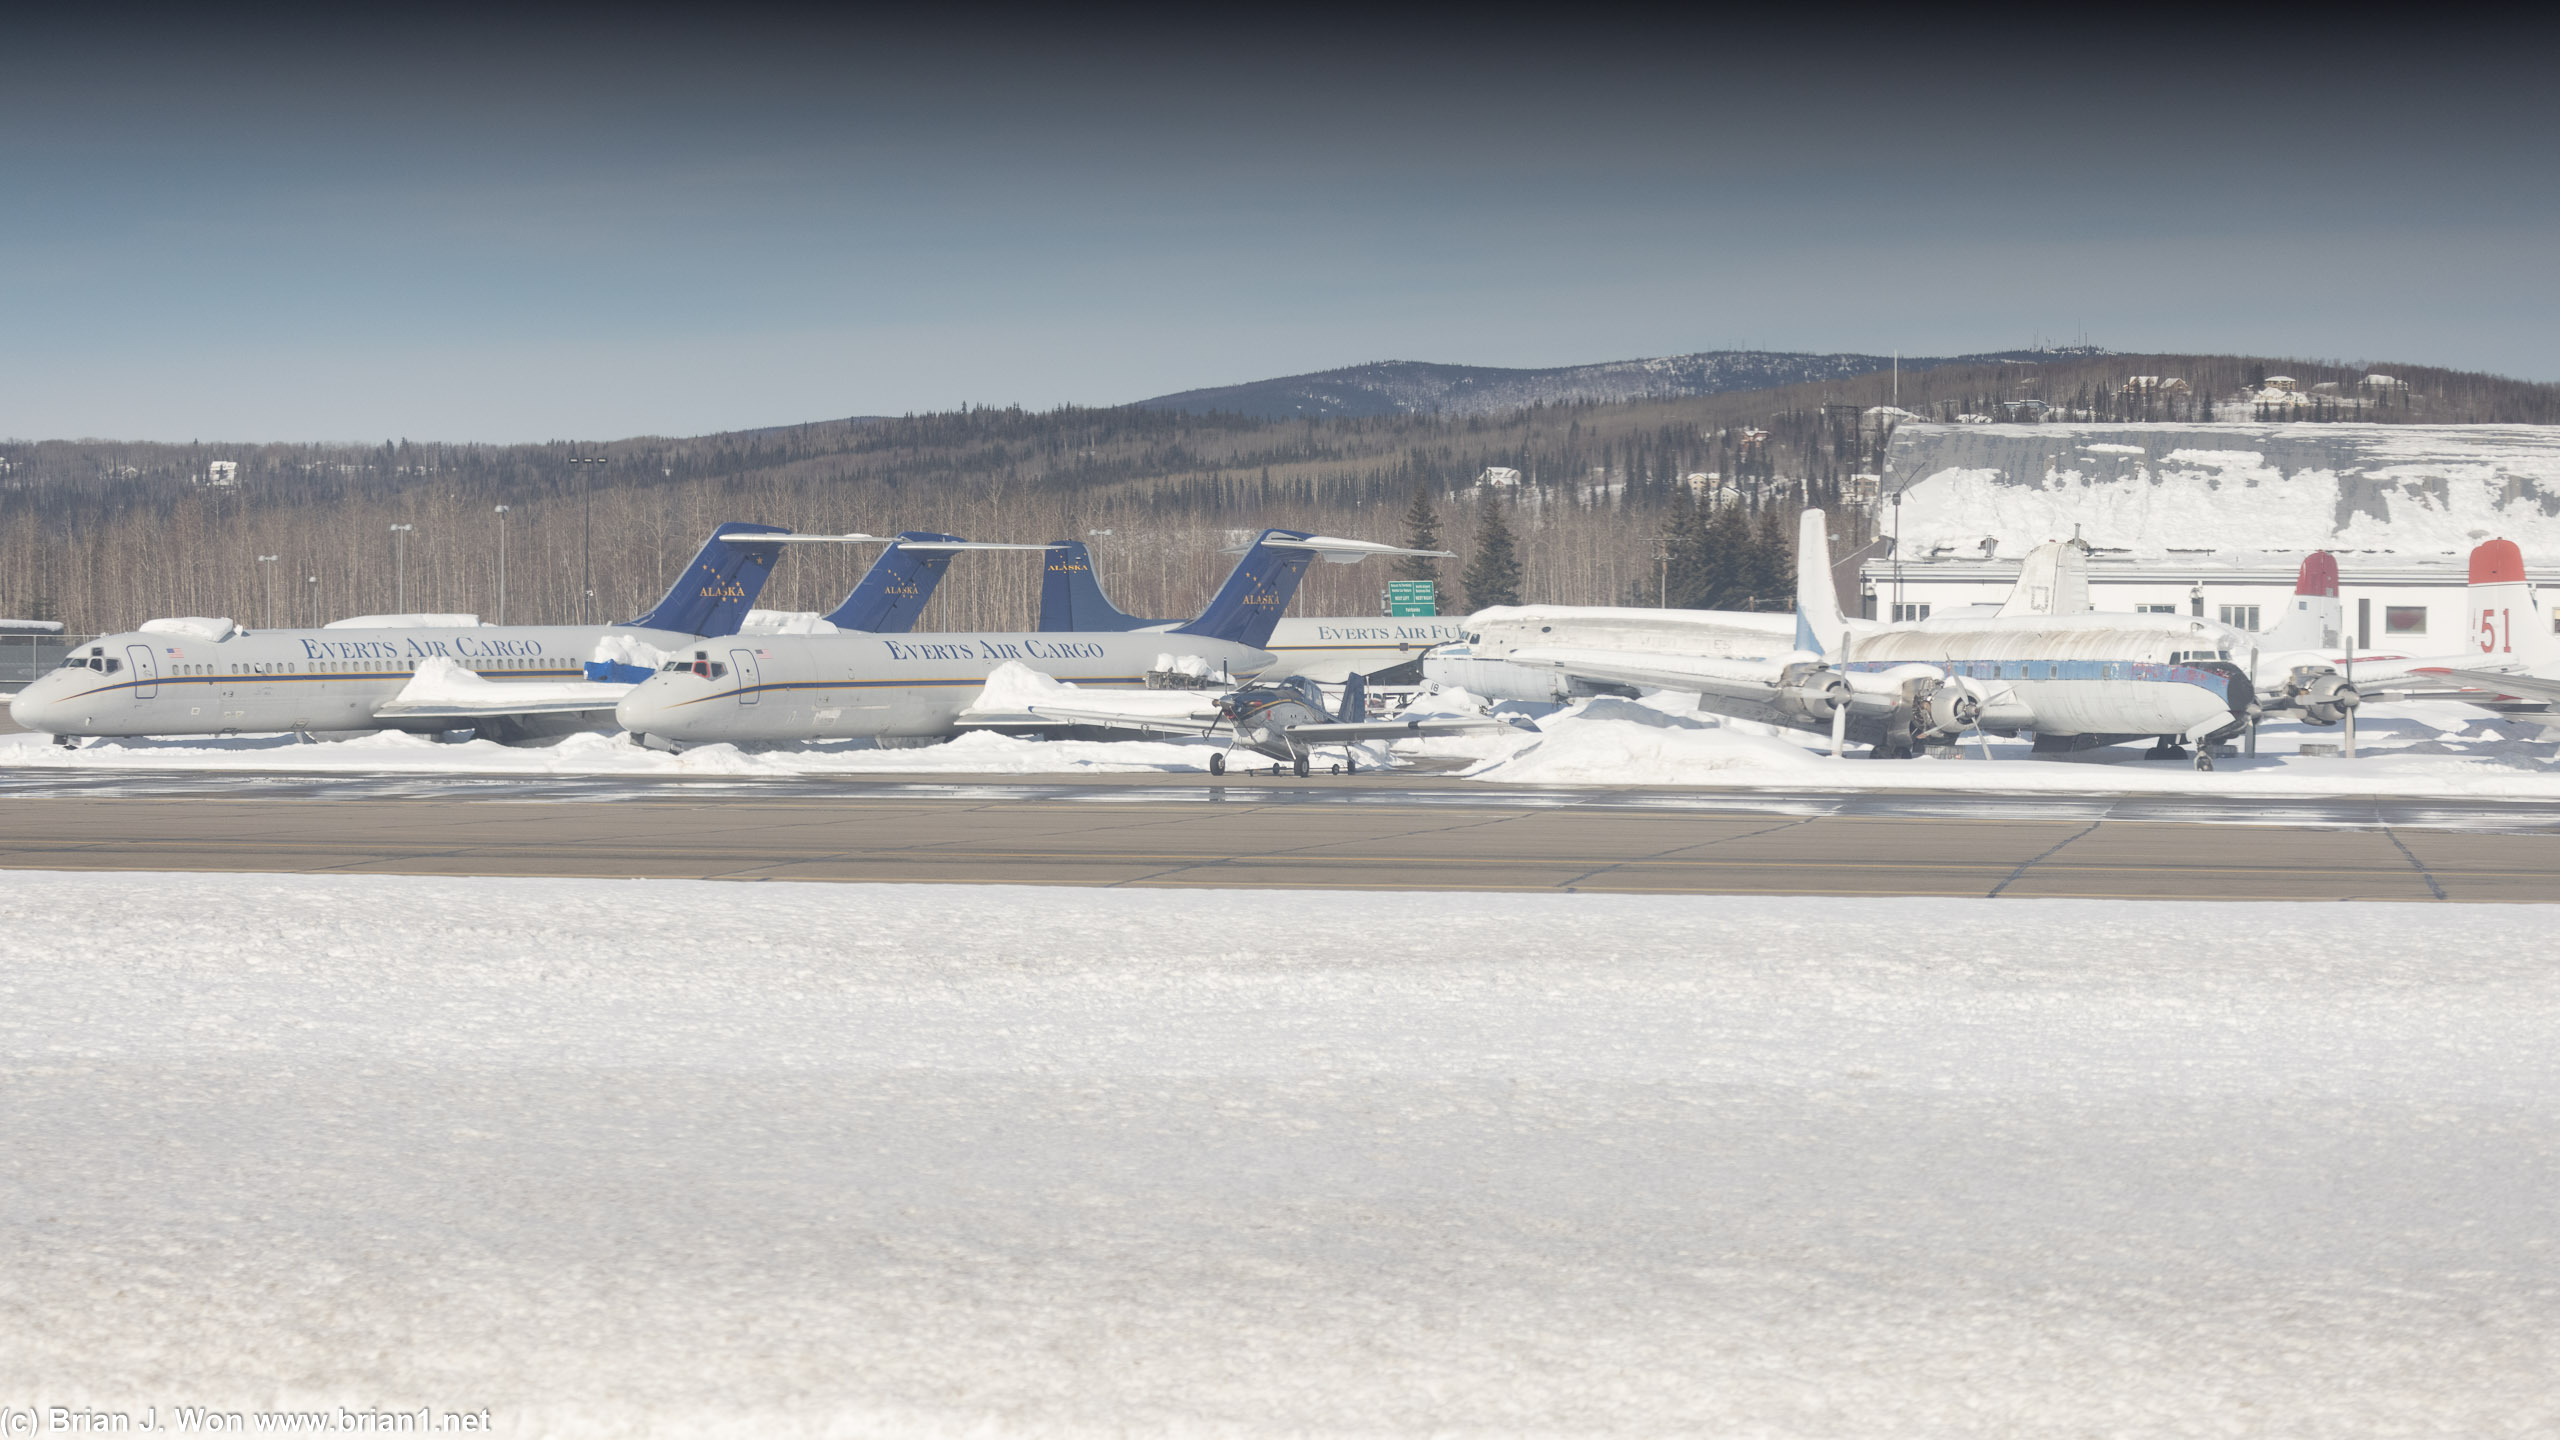 MD-80's and DC-6's of Everts Air Cargo in the snow.